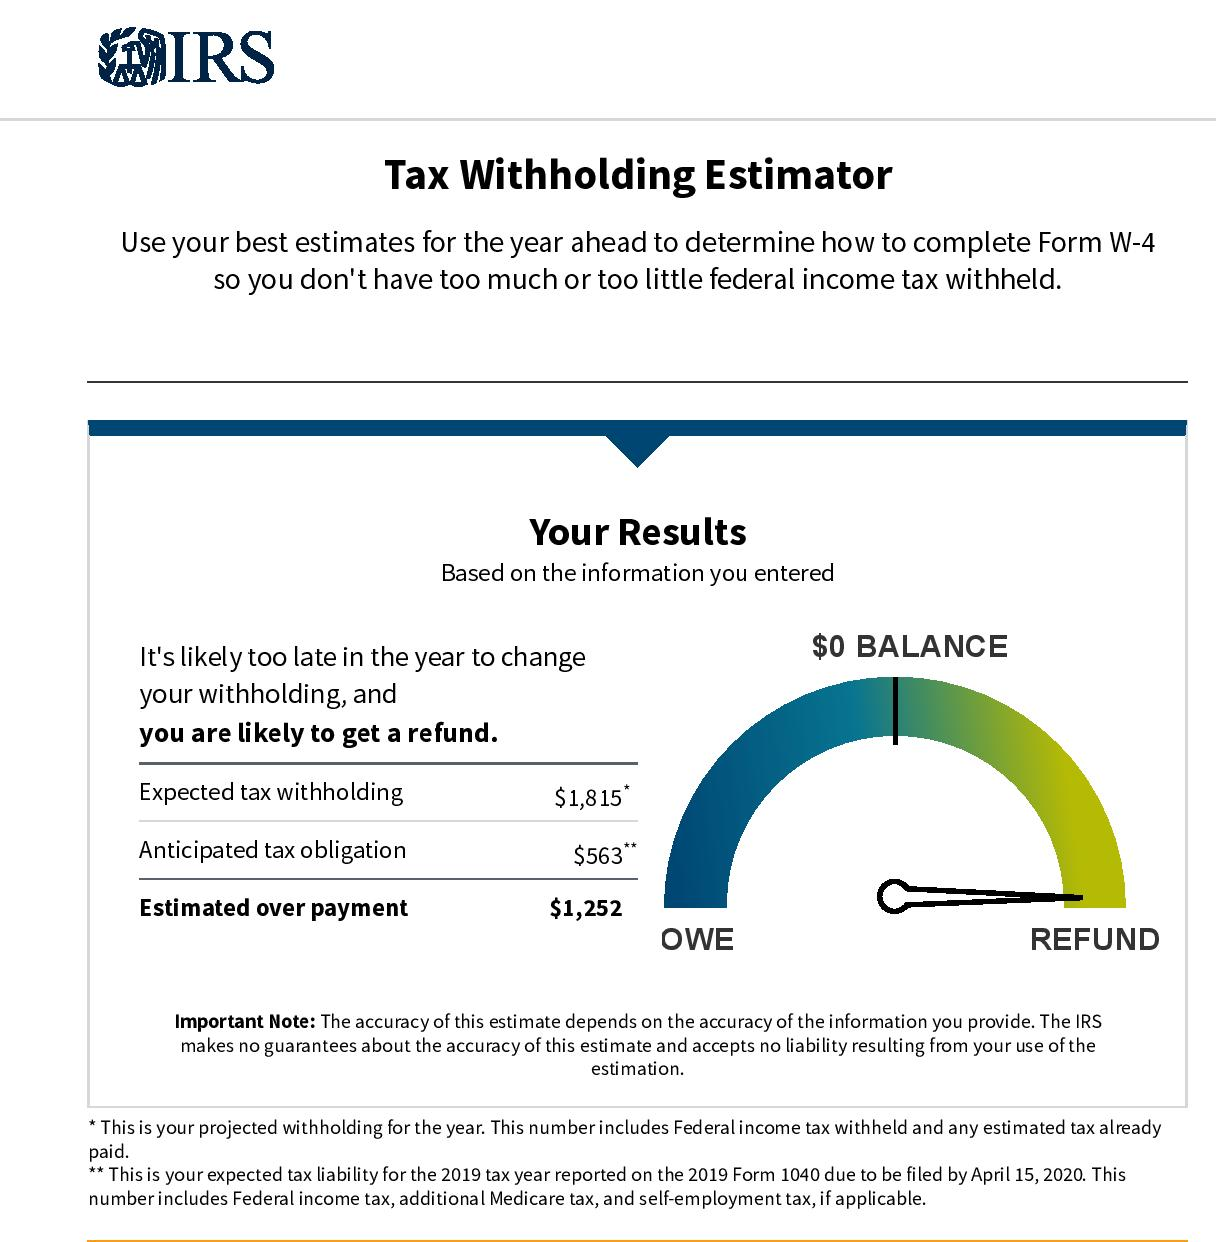 irs-tax-withholding-estimator-refund-blank-template-imgflip